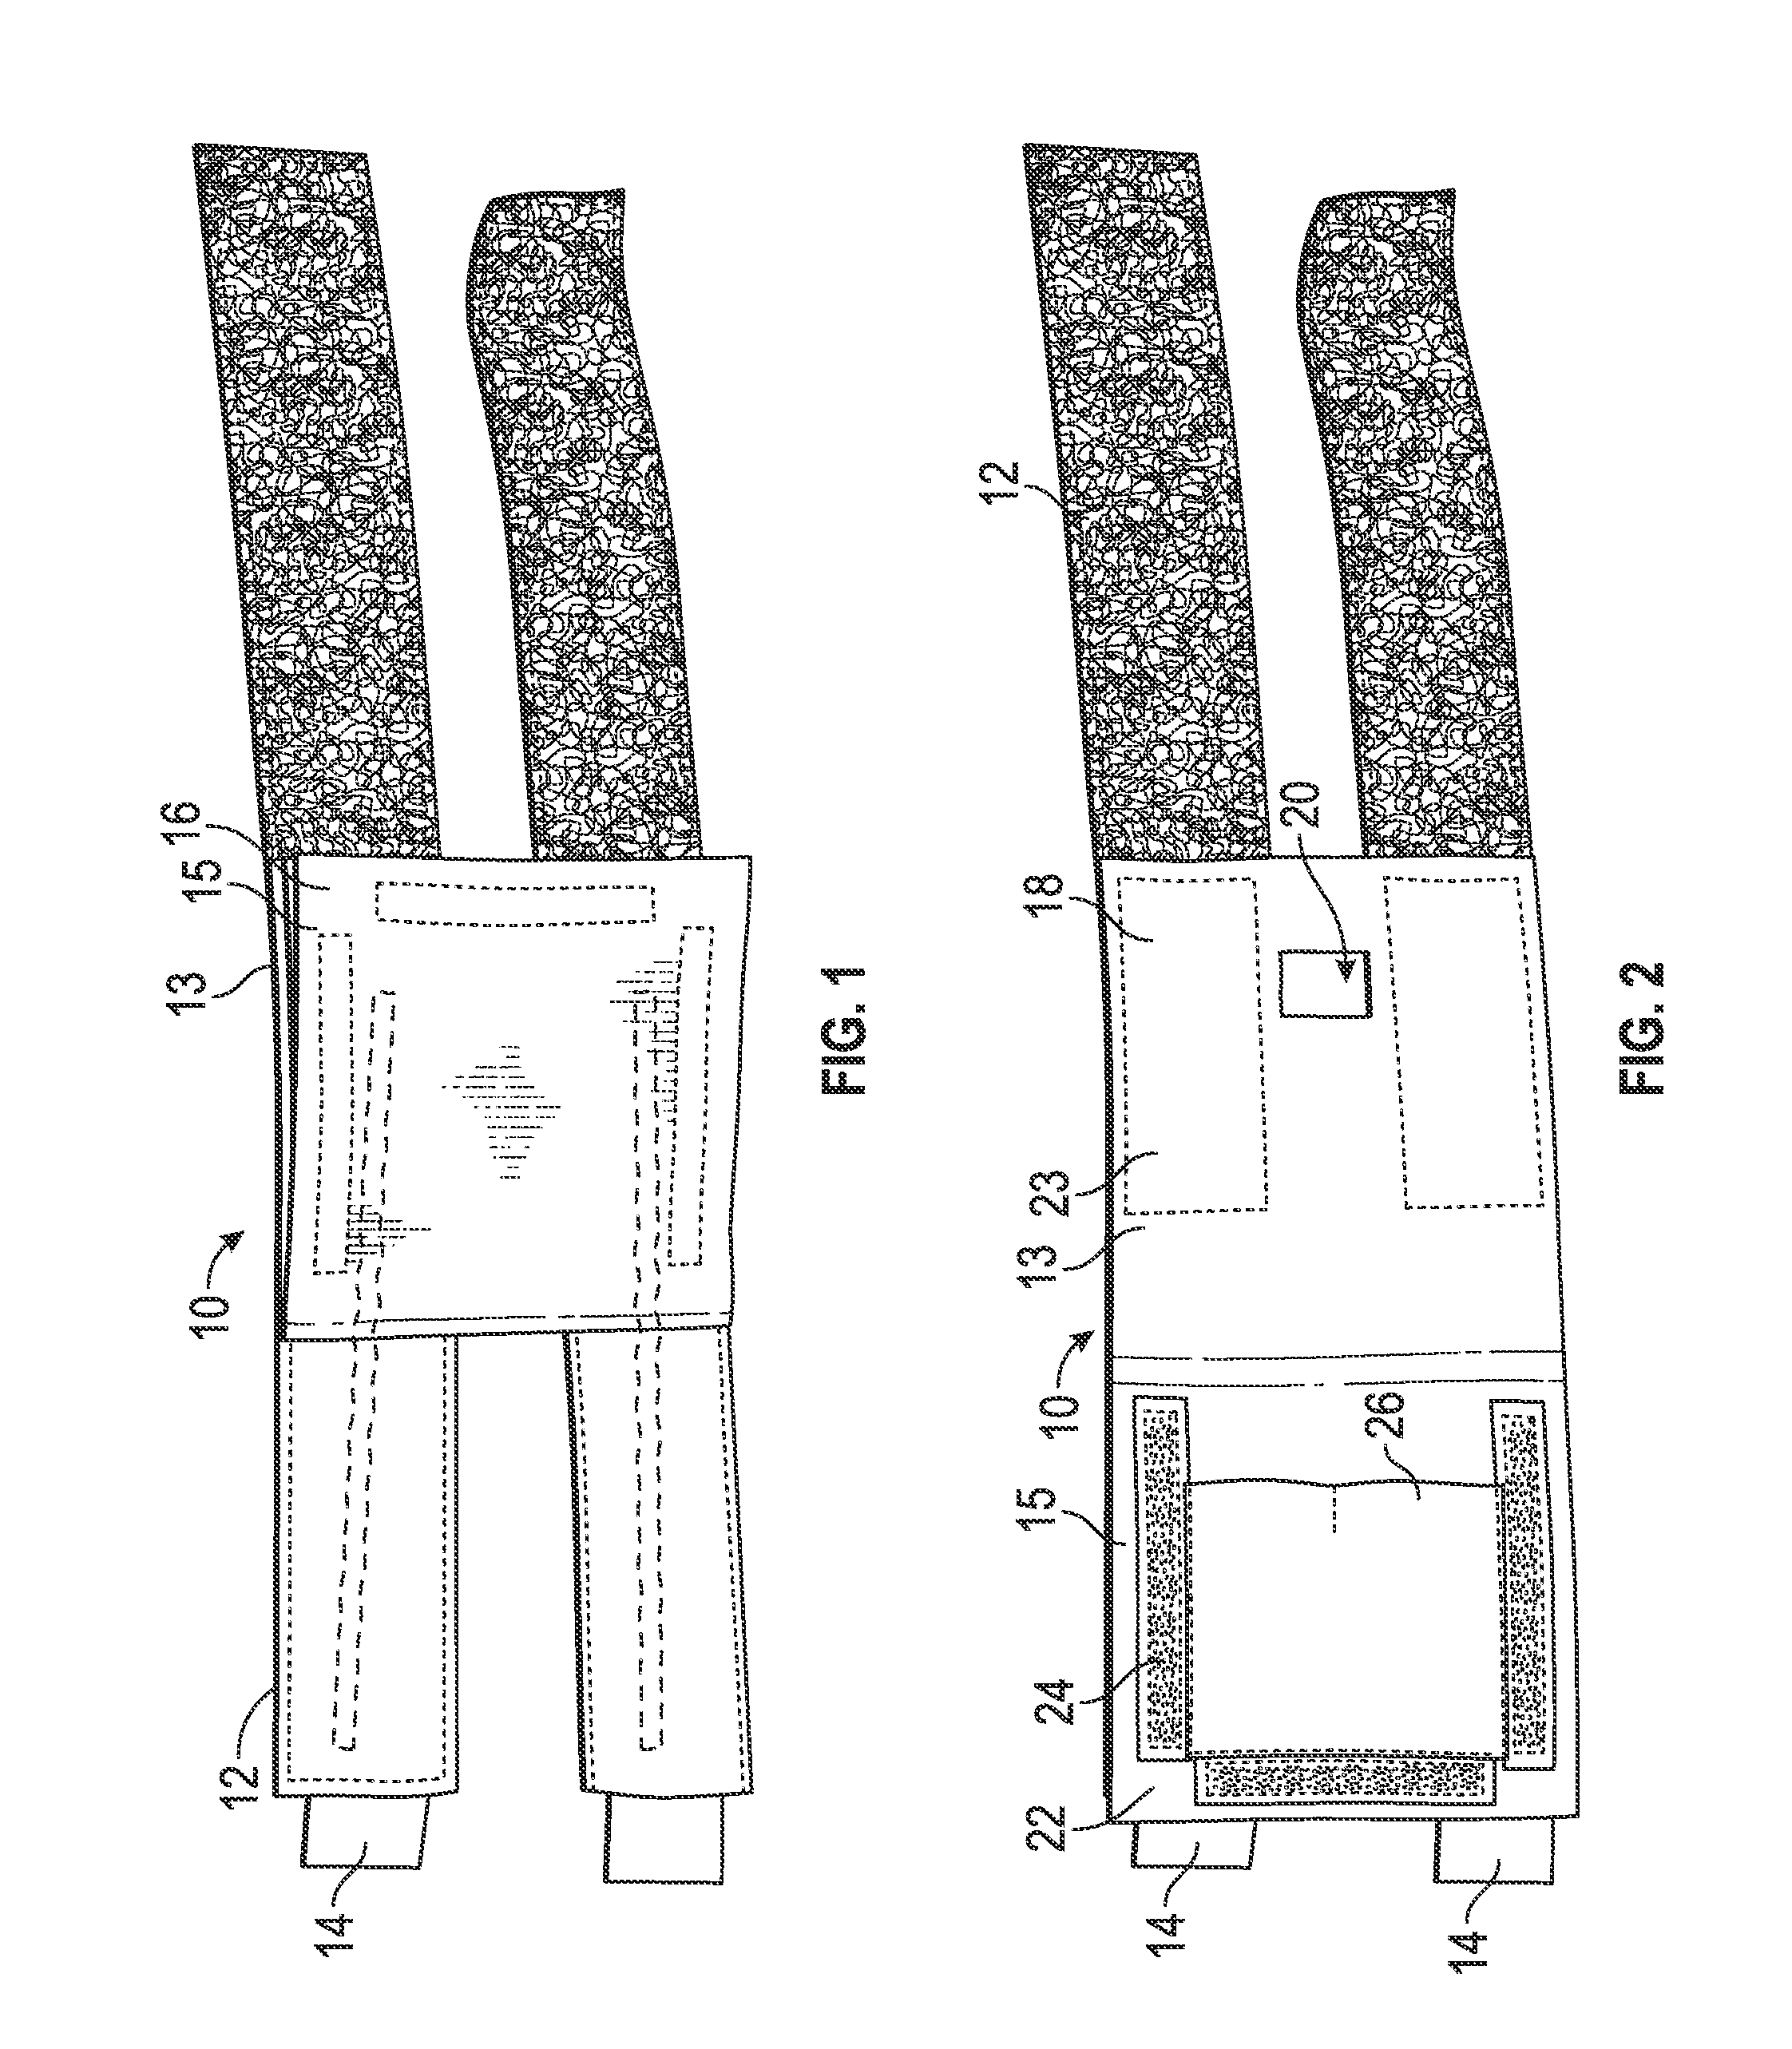 Protection and securing apparatus for externally protruding medical tubes